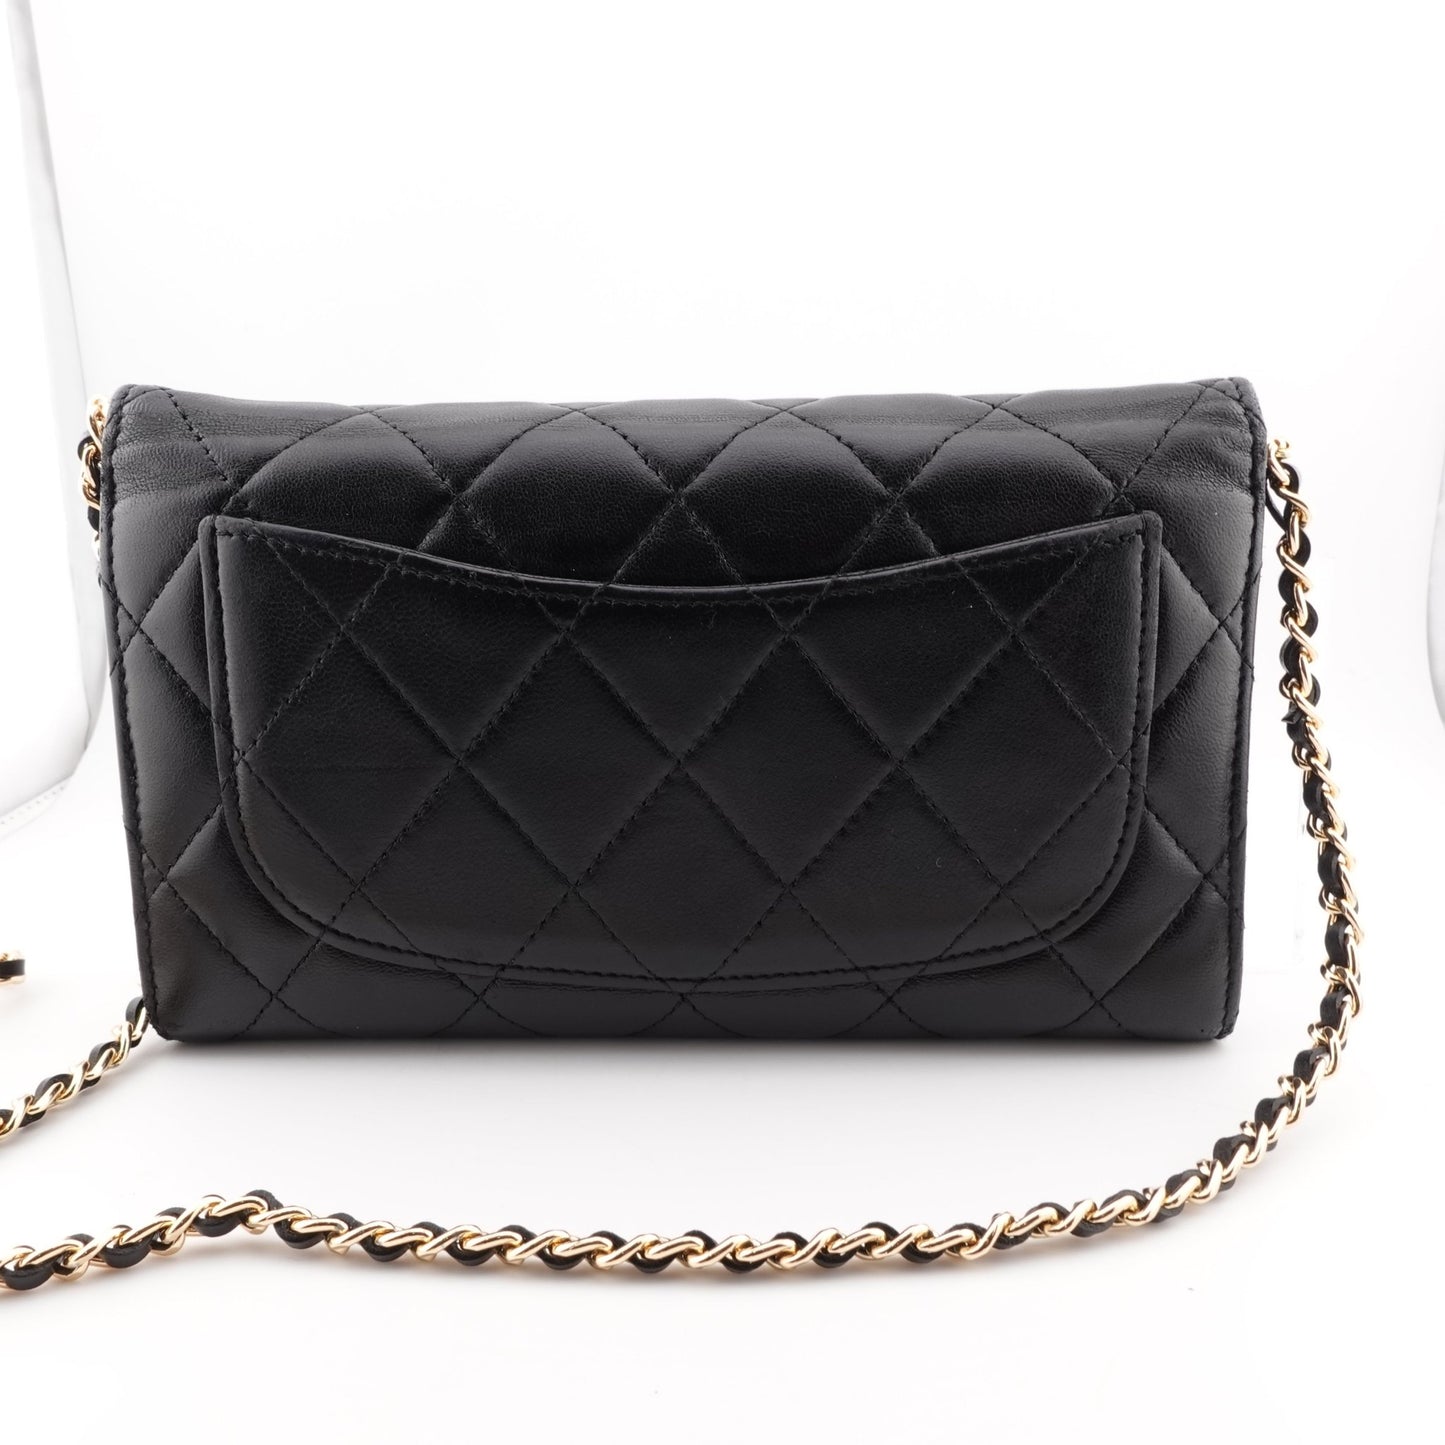 CHANEL Lambskin Classic Flap Wallet with Chain - Bag Envy